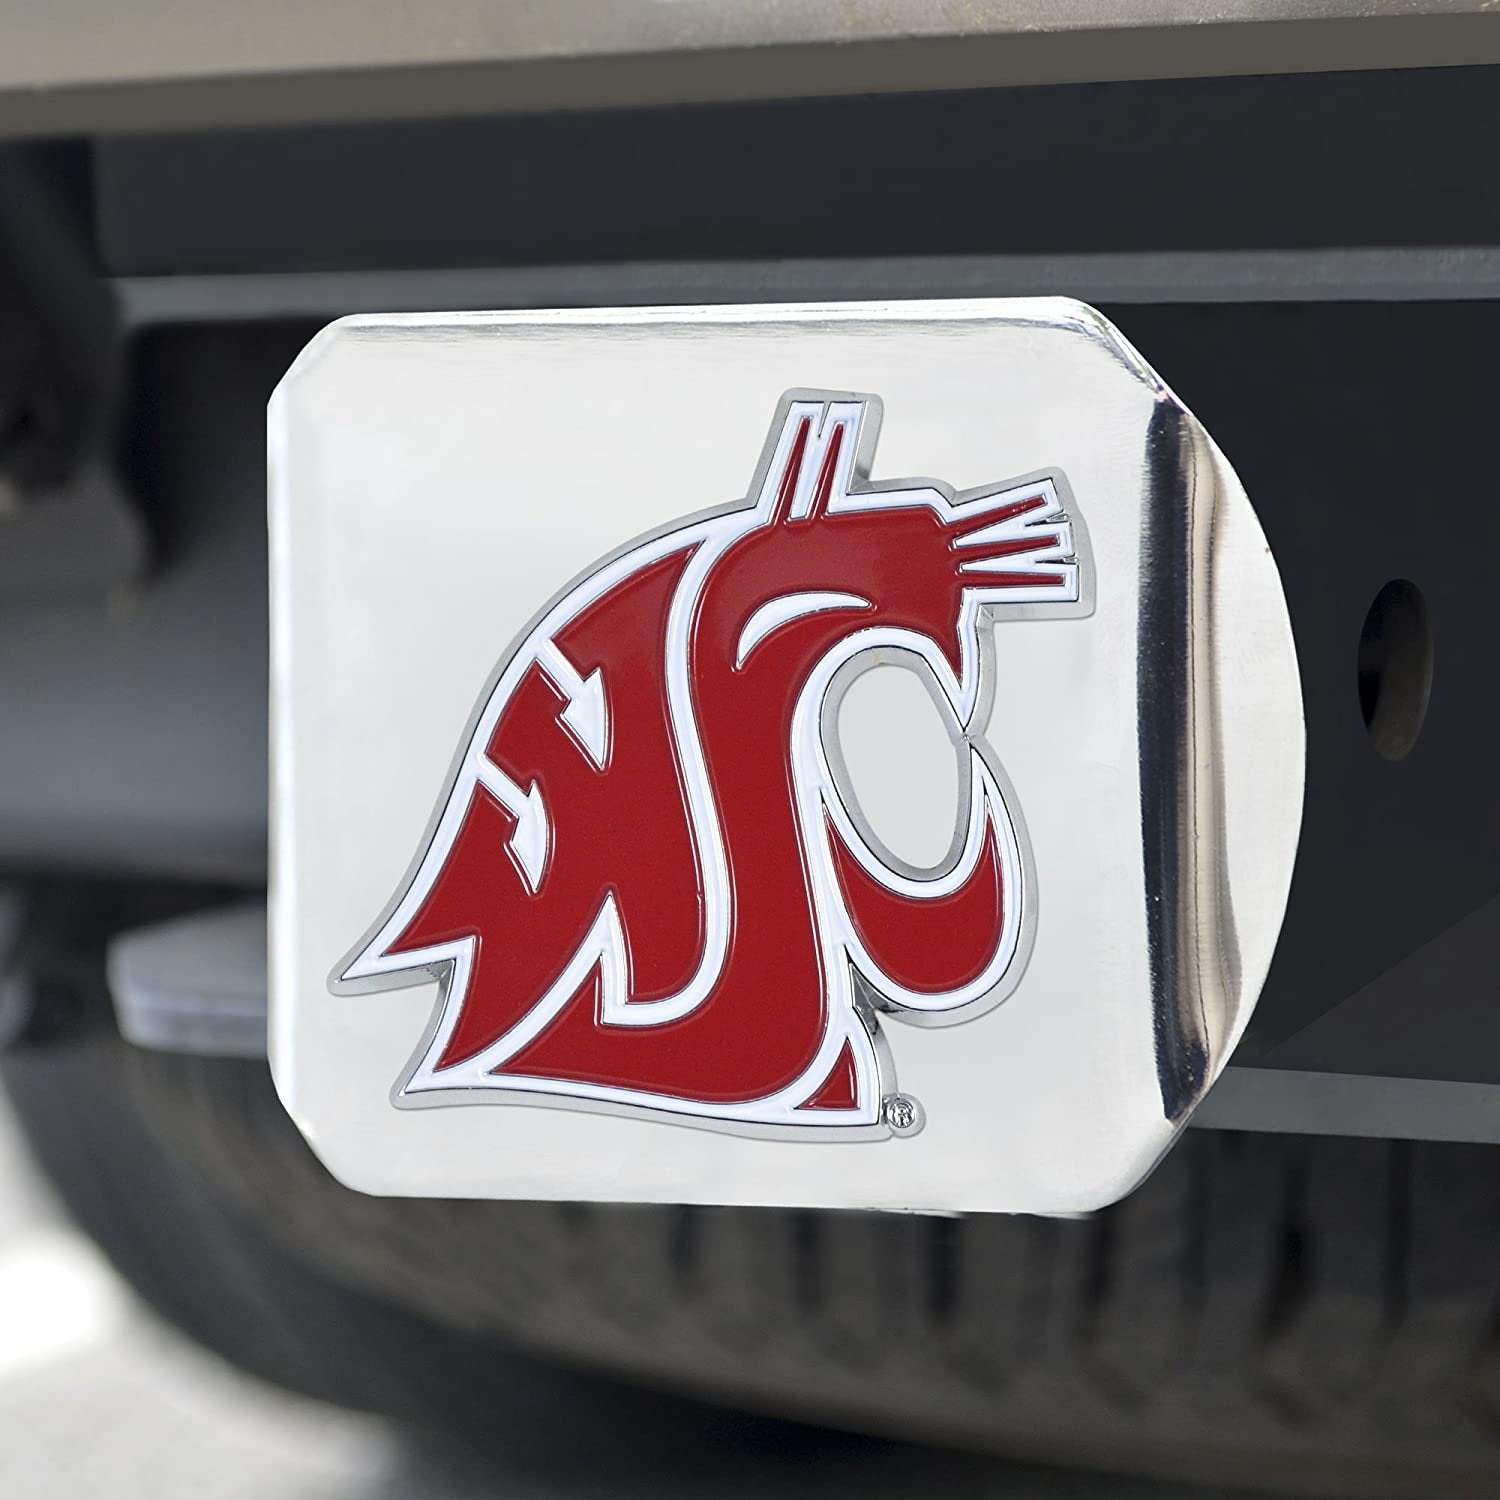 Washington State Cougars Hitch Cover Solid Metal with Raised Color Metal Emblem 2" Square Type III University